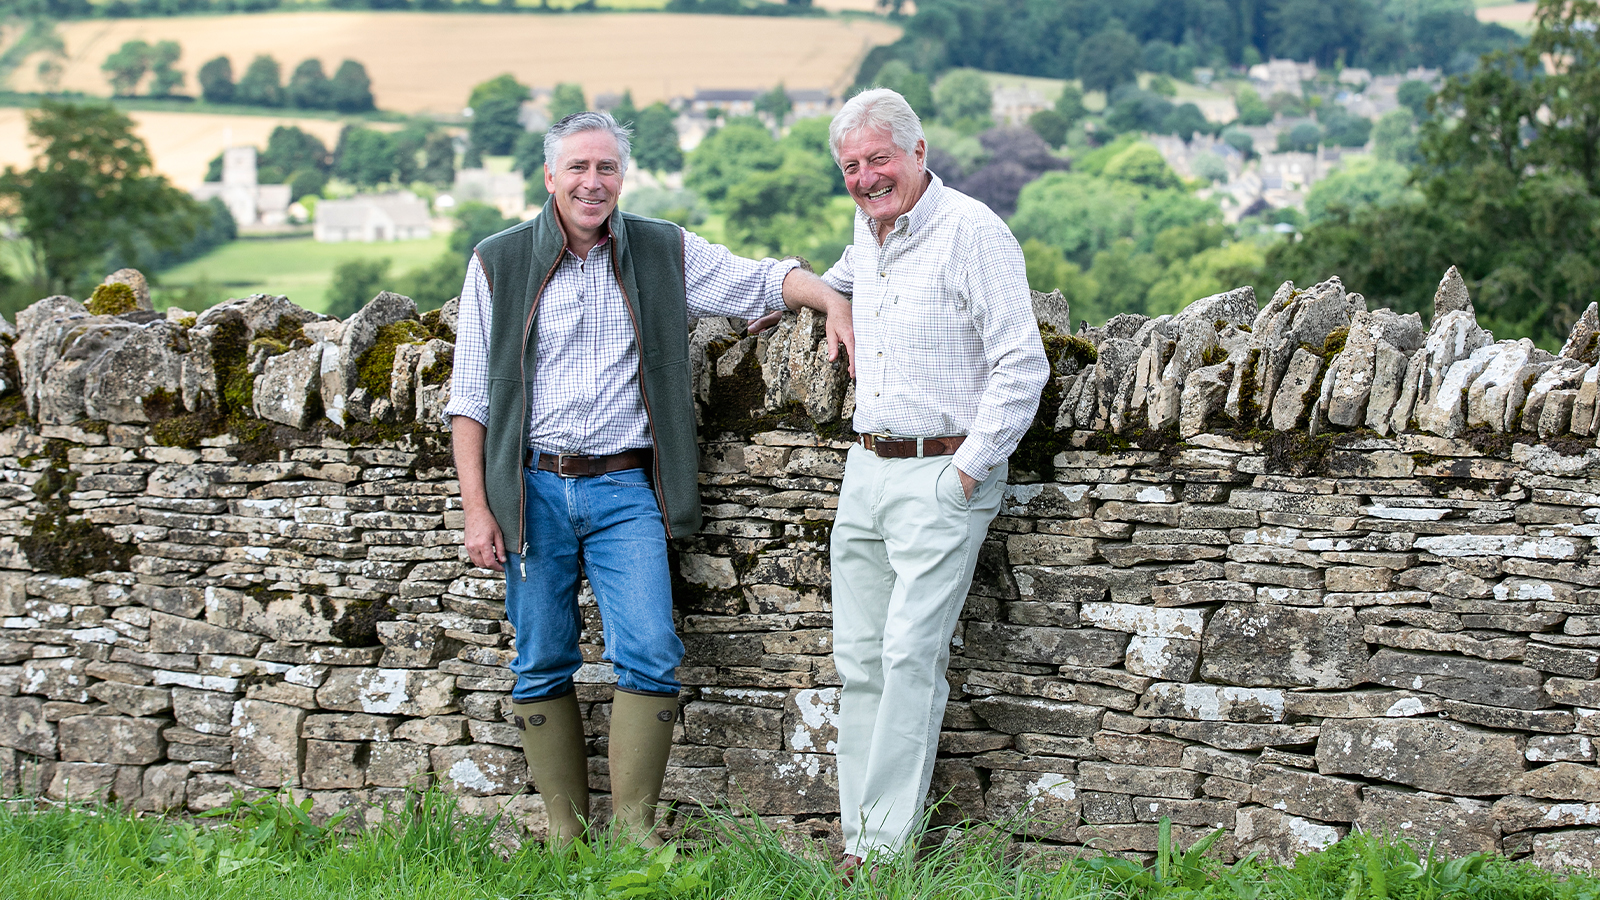 Tony and Tony2 stand in front of an old stone wall, they are relaxed and smiling at the camera.